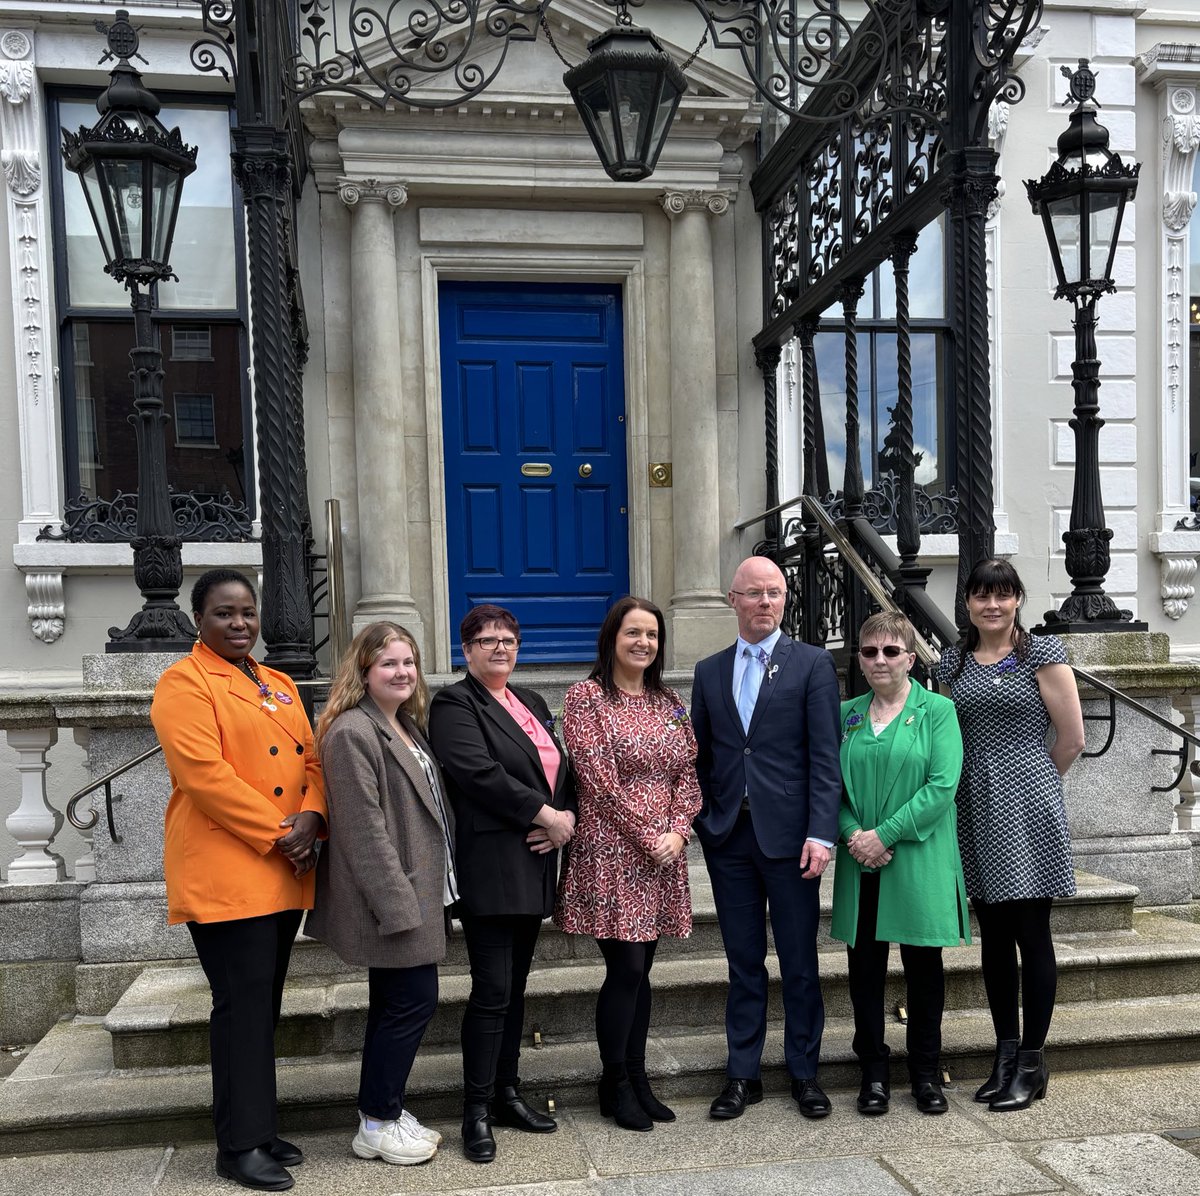 Delighted to be invited as representative of @ANNI_Nurse and #Ethnicminoritygroups with the @IrishKidneyAs to spread the word at the launch of Organ Donor Awareness Week today in the Mansion House with the Minister of Health @DonnellyStephen @SenatorMarkDaly #Leavenodoubt